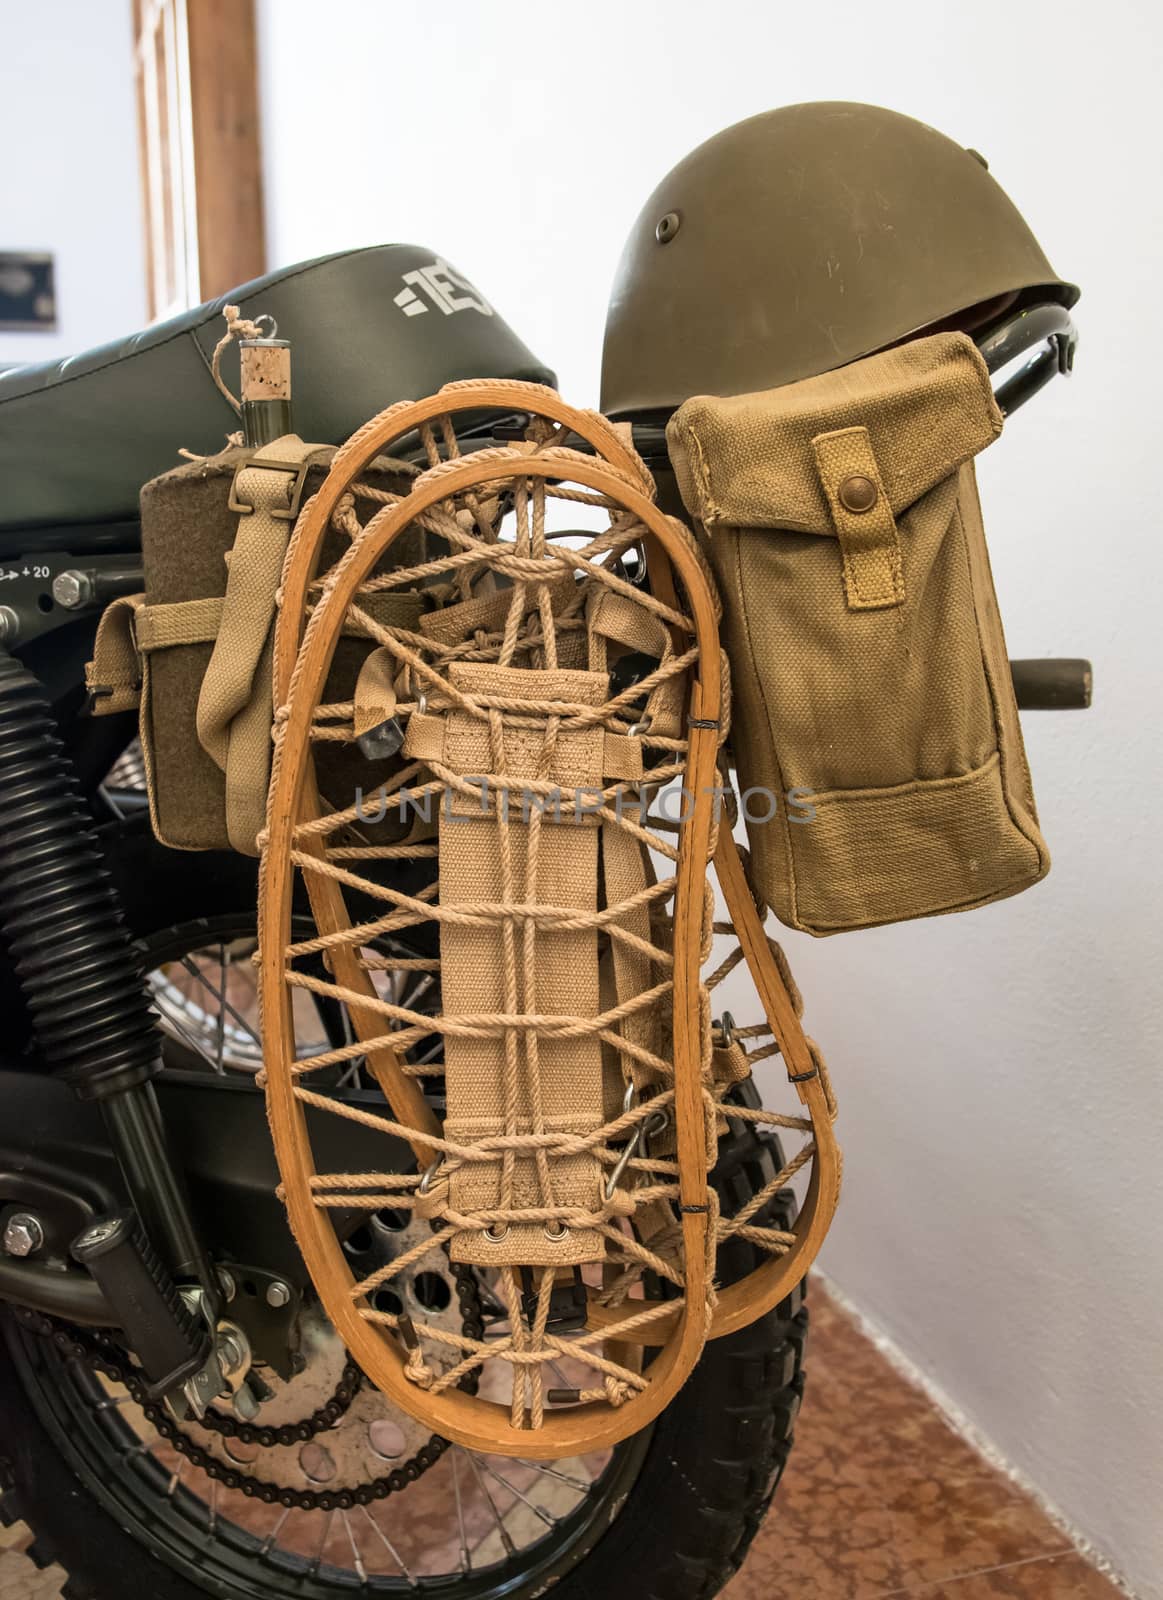 Winter equipment supplied to an old military bike. by Isaac74